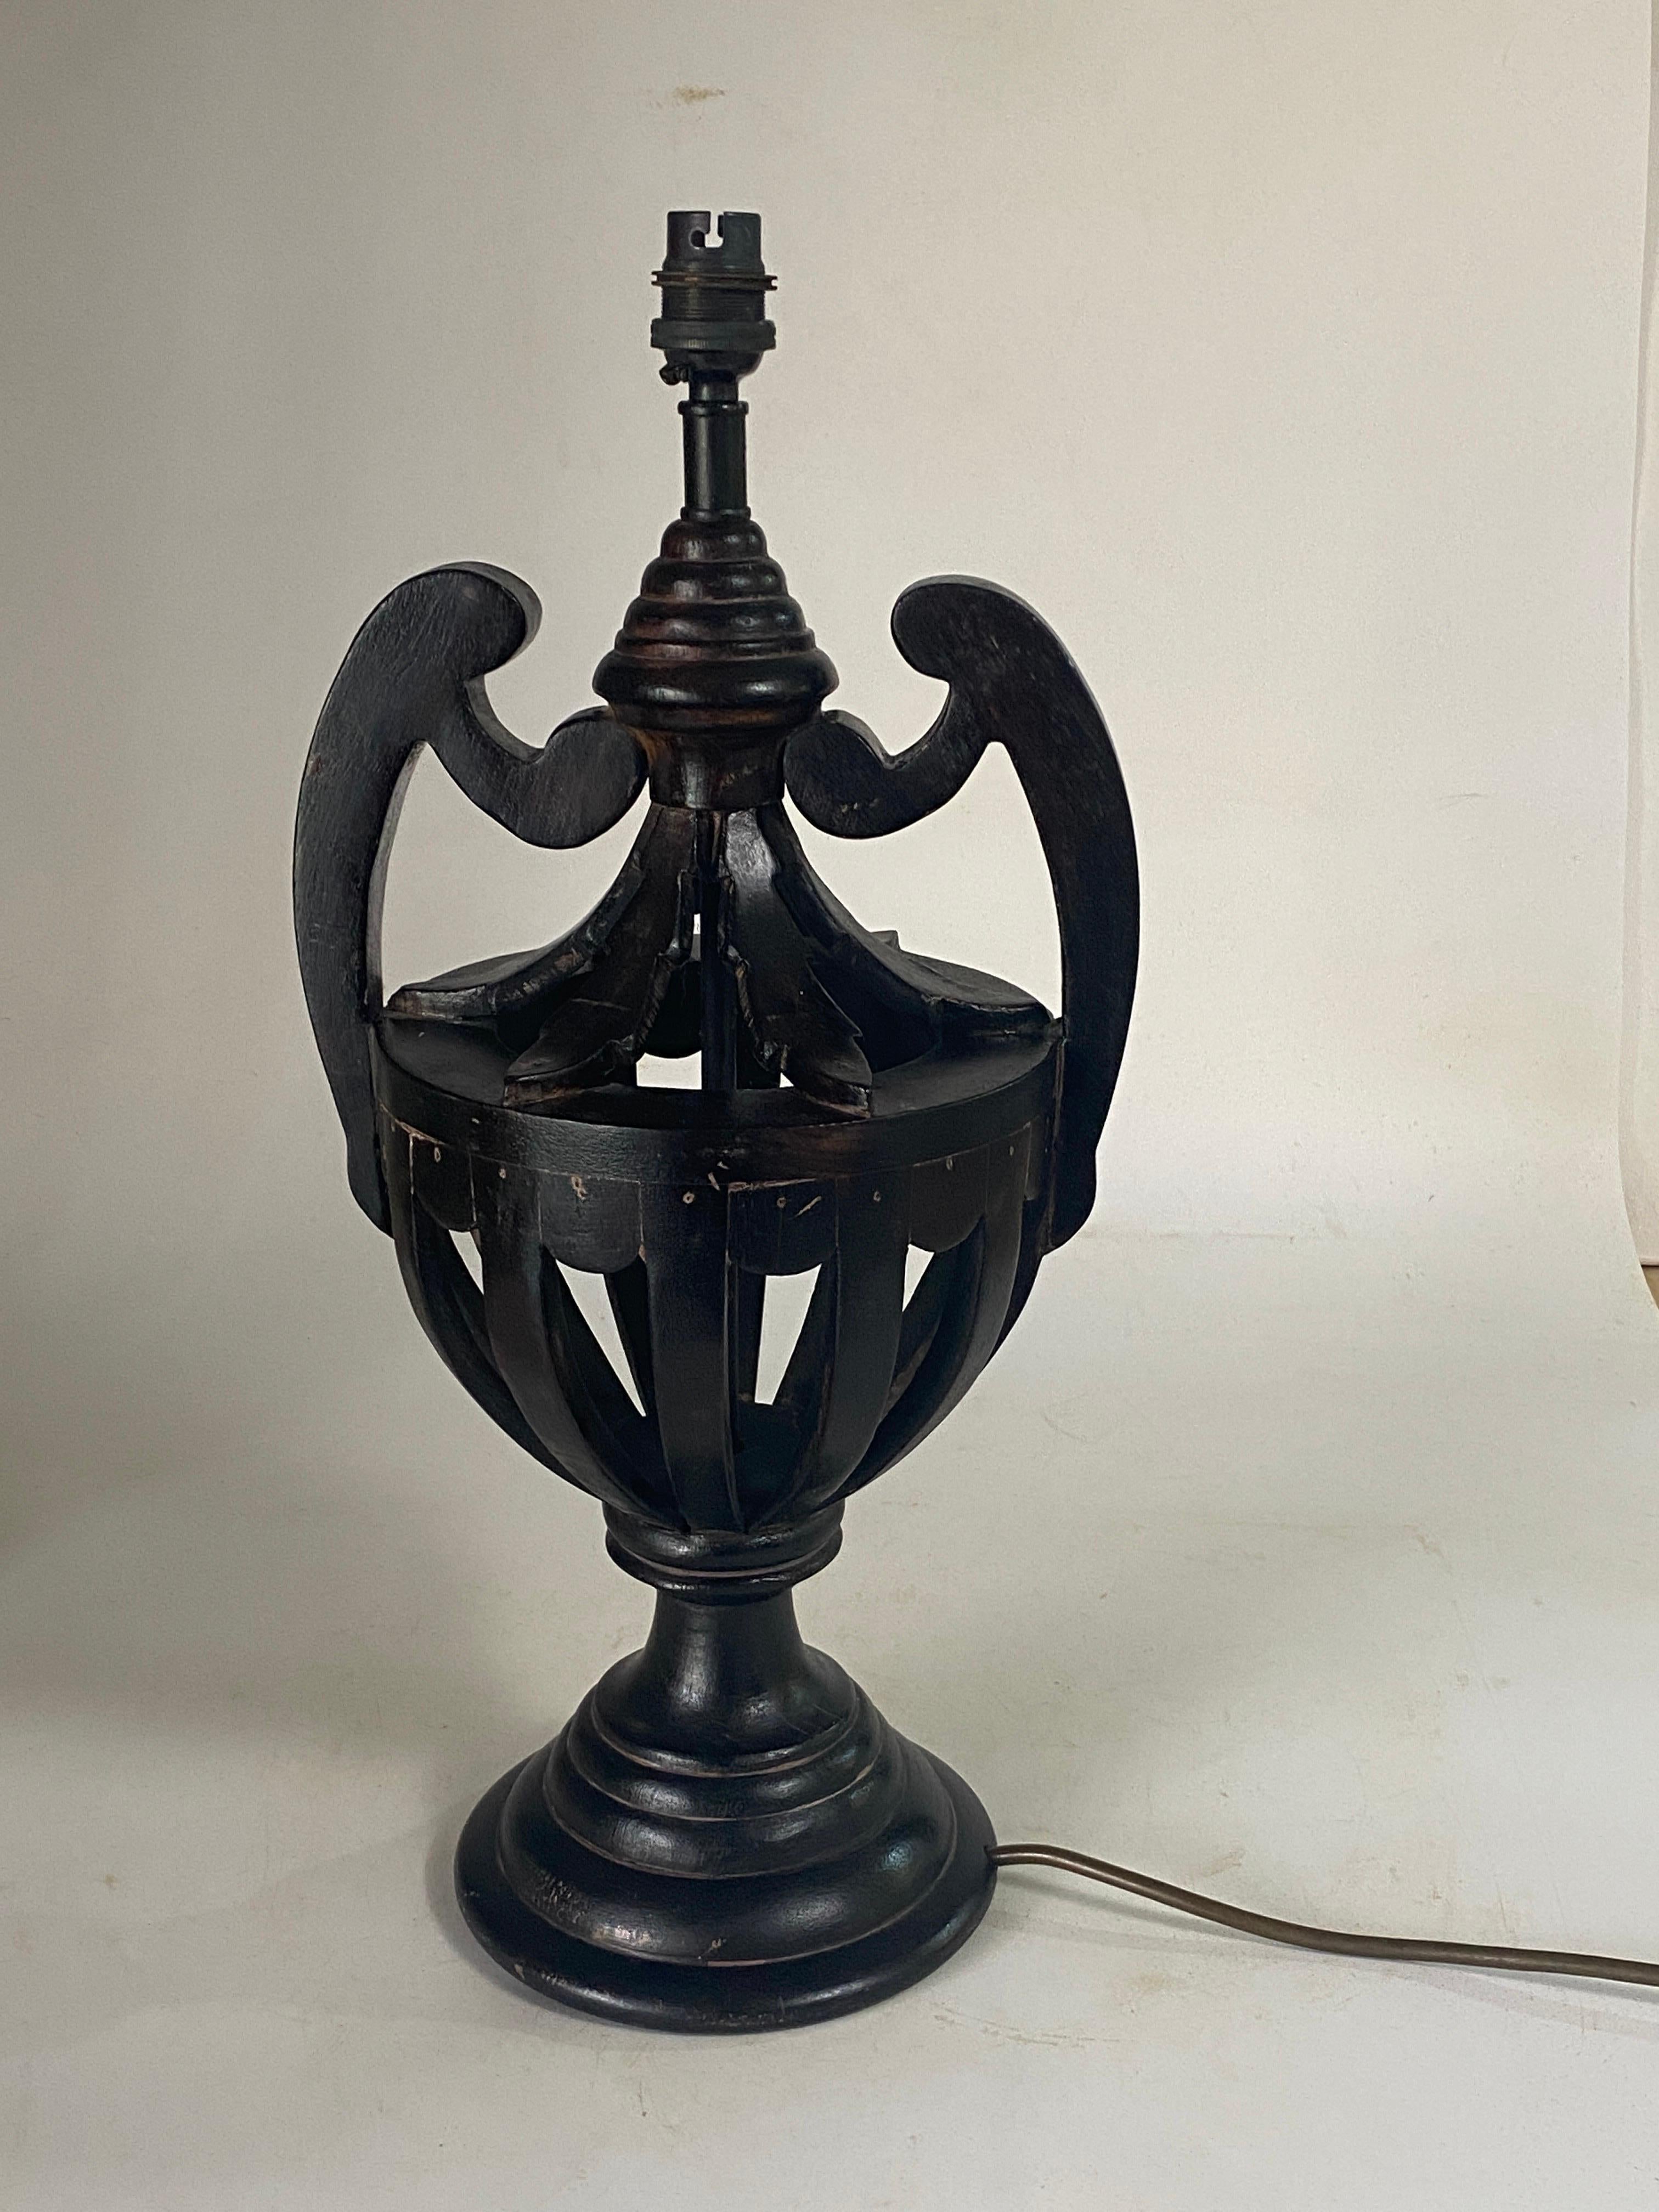 Franch Pair of Solid Wood Table Lamps Black Color 20th Century For Sale 1